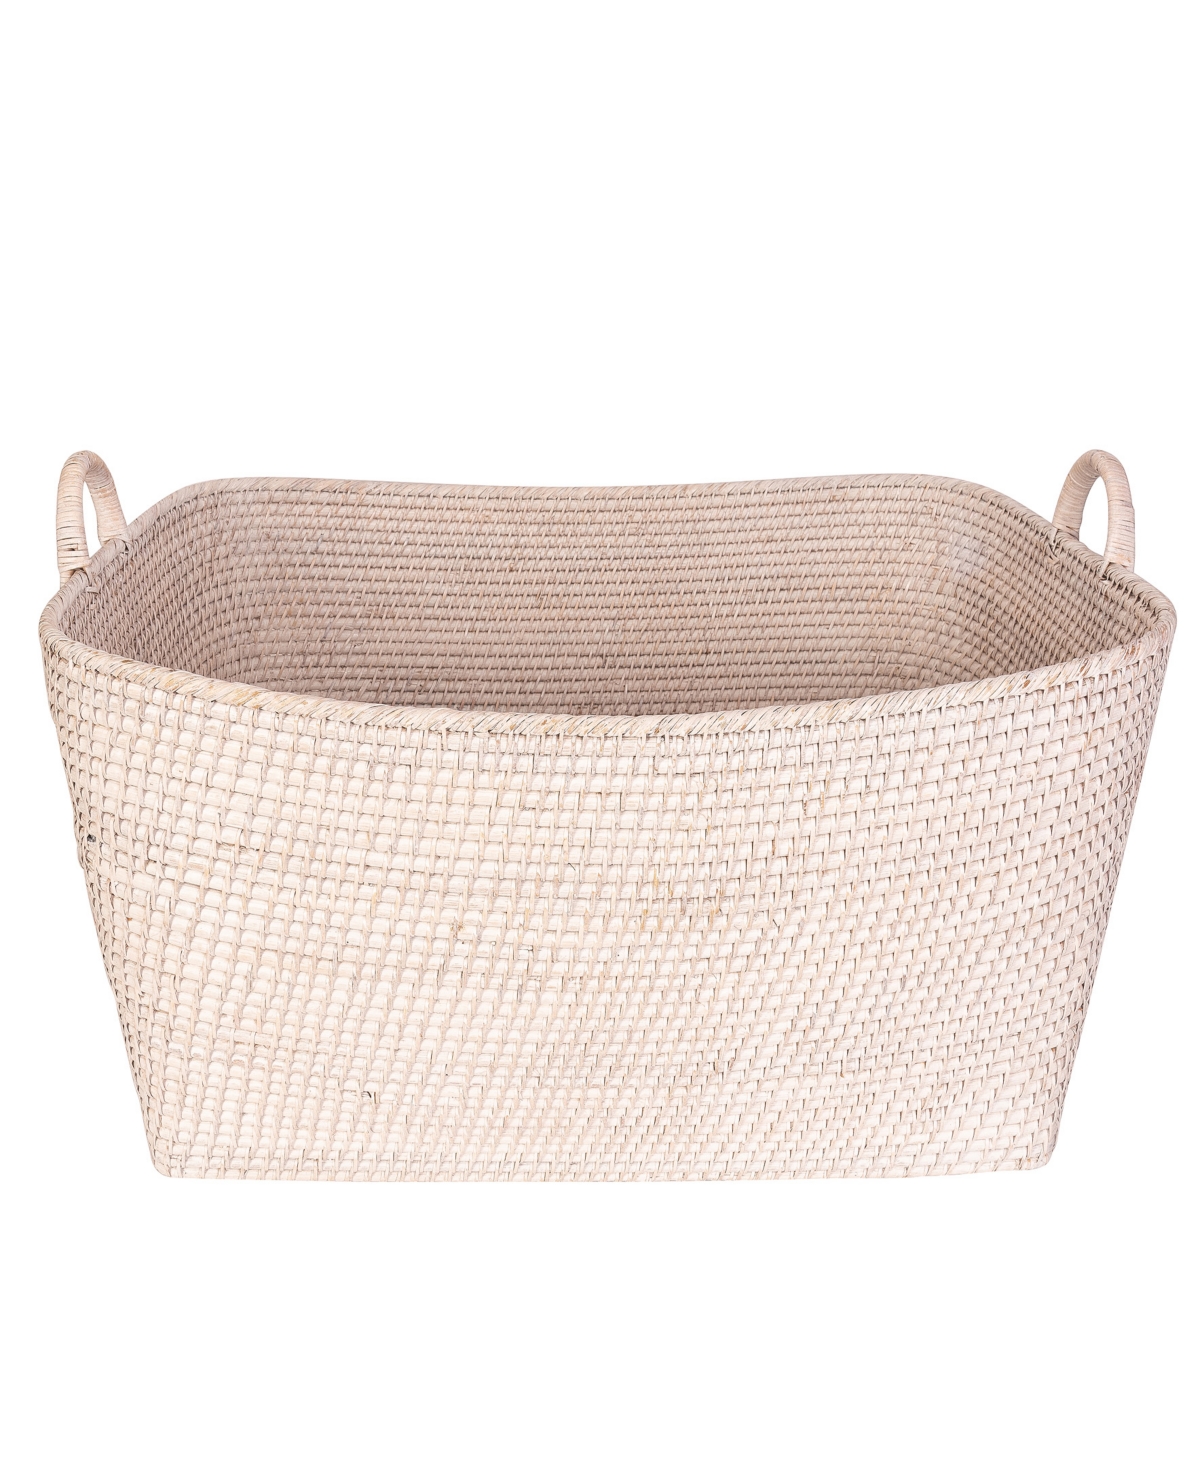 Artifacts Trading Company Saboga Home Everything Basket With Hoop Handles In White Wash